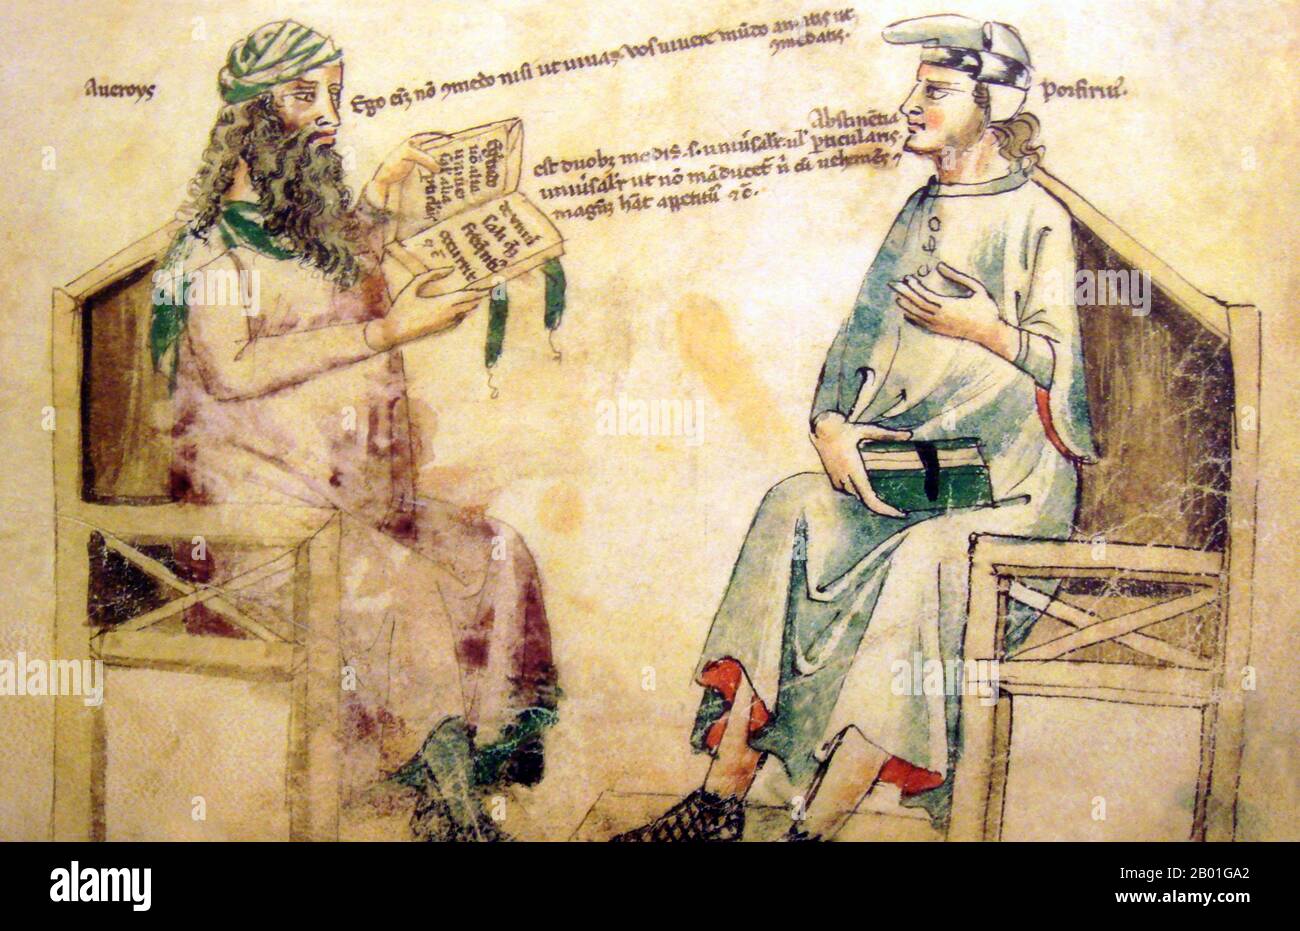 Spain/Al-Andalus: Imaginary debate between Ibn Rushd (Averroes) and Porphyry of Tyre. Monfredo de Monte Imperiali Liber de herbis, 14th century.  Abū l-Walīd Muḥammad bin ʾAḥmad bin Rušd, better known as Ibn Rushd, and in European literature as Averroes (1126 – 10 December 1198), was a Muslim polymath; a master of Aristotelian philosophy, Islamic philosophy, Islamic theology, Maliki law and jurisprudence, logic, psychology, politics, Arabic music theory, and the sciences of medicine, astronomy, geography, mathematics, physics and celestial mechanics. Stock Photo